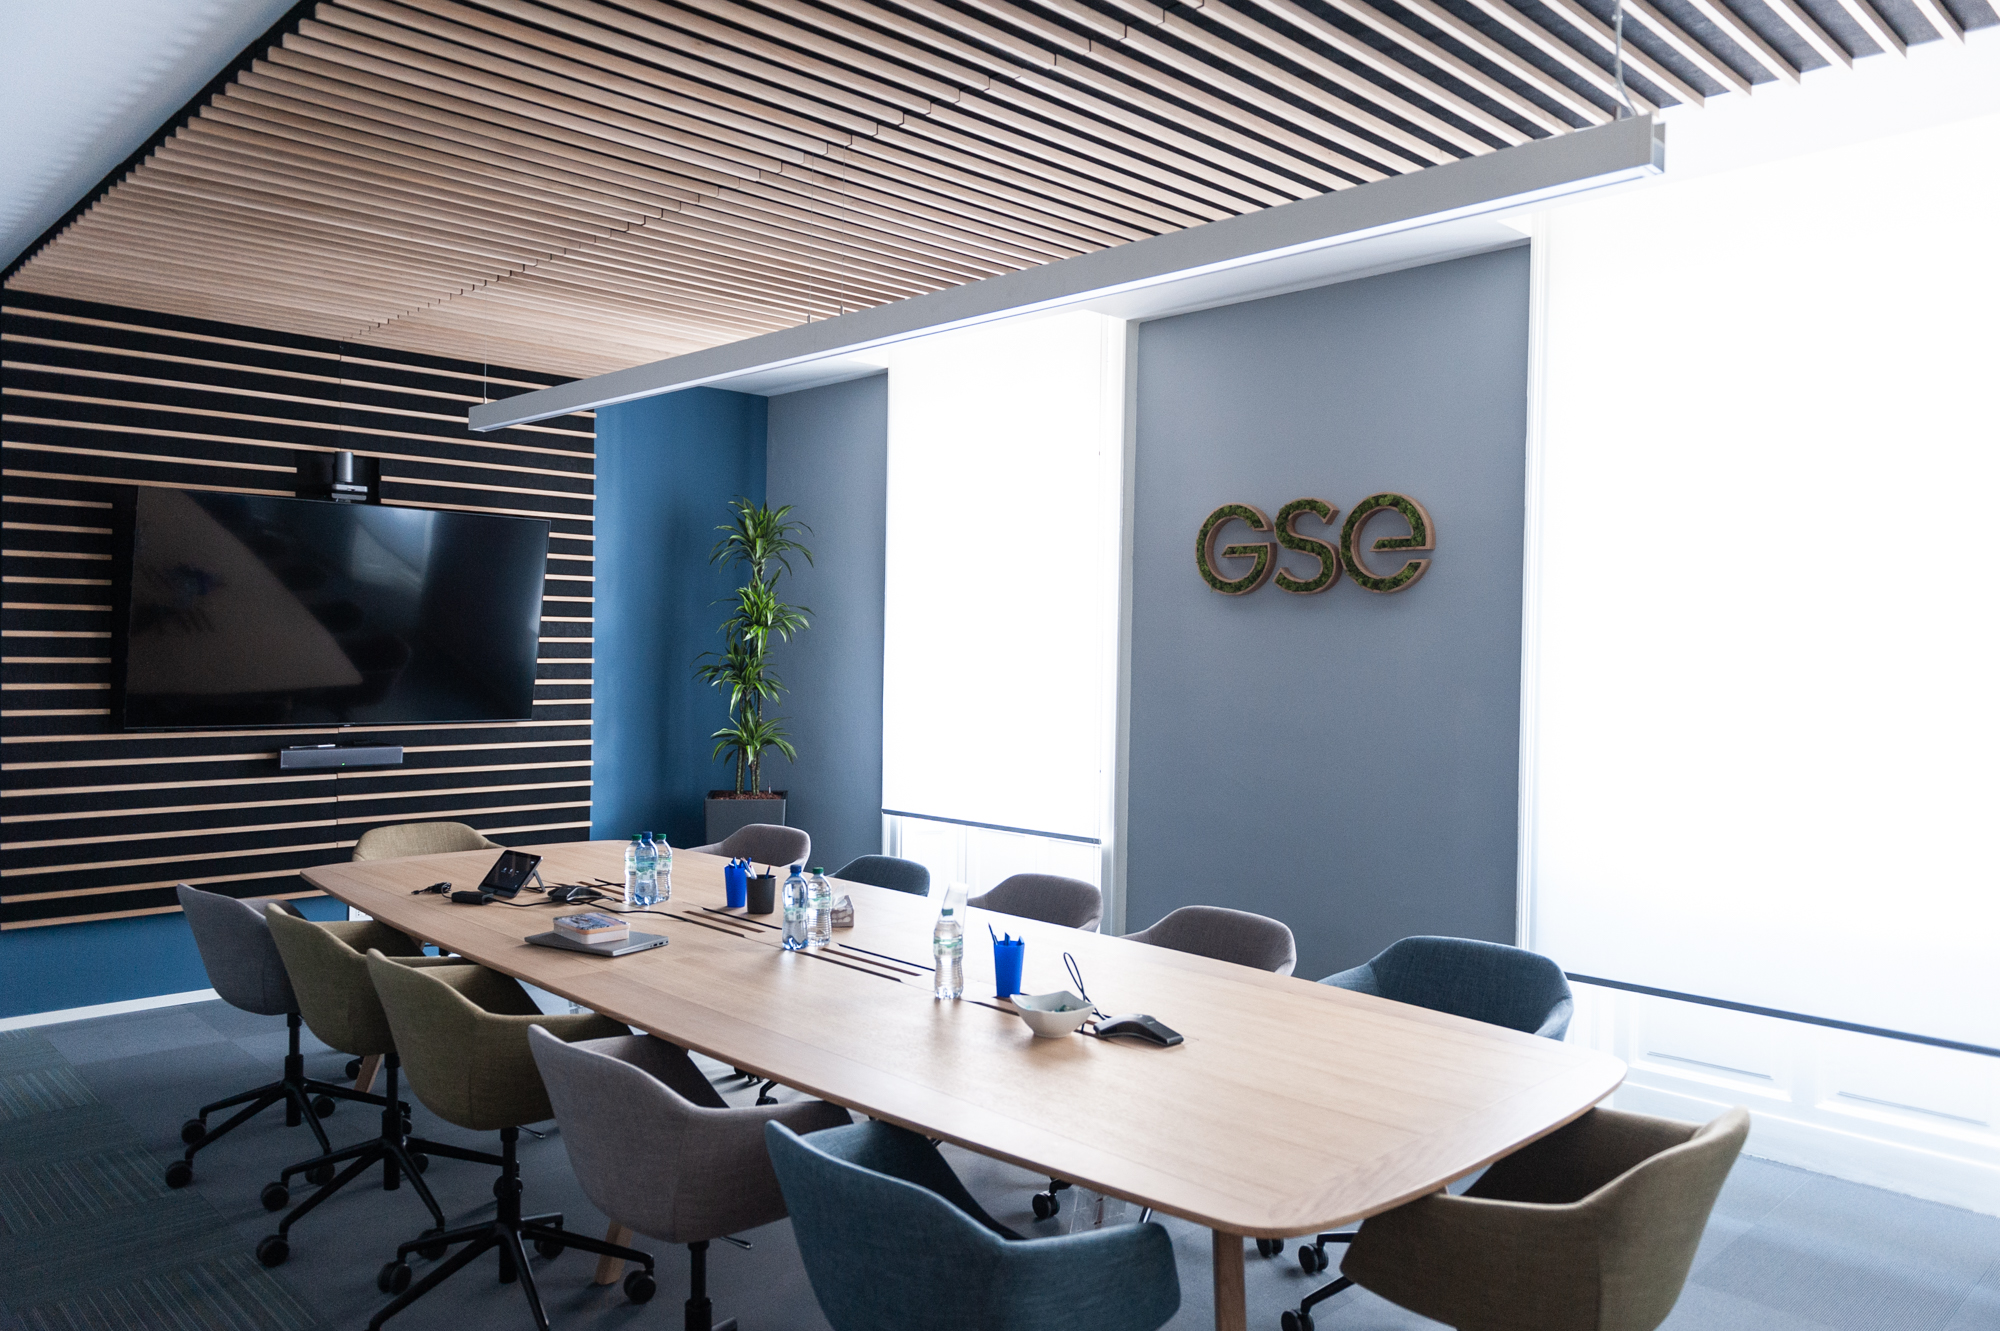 GSE ITALIA STRENGTHENS ITS GROWTH PATH IN 2021: AN YEAR OF GREAT PROGRESS FOR THE BRANCH